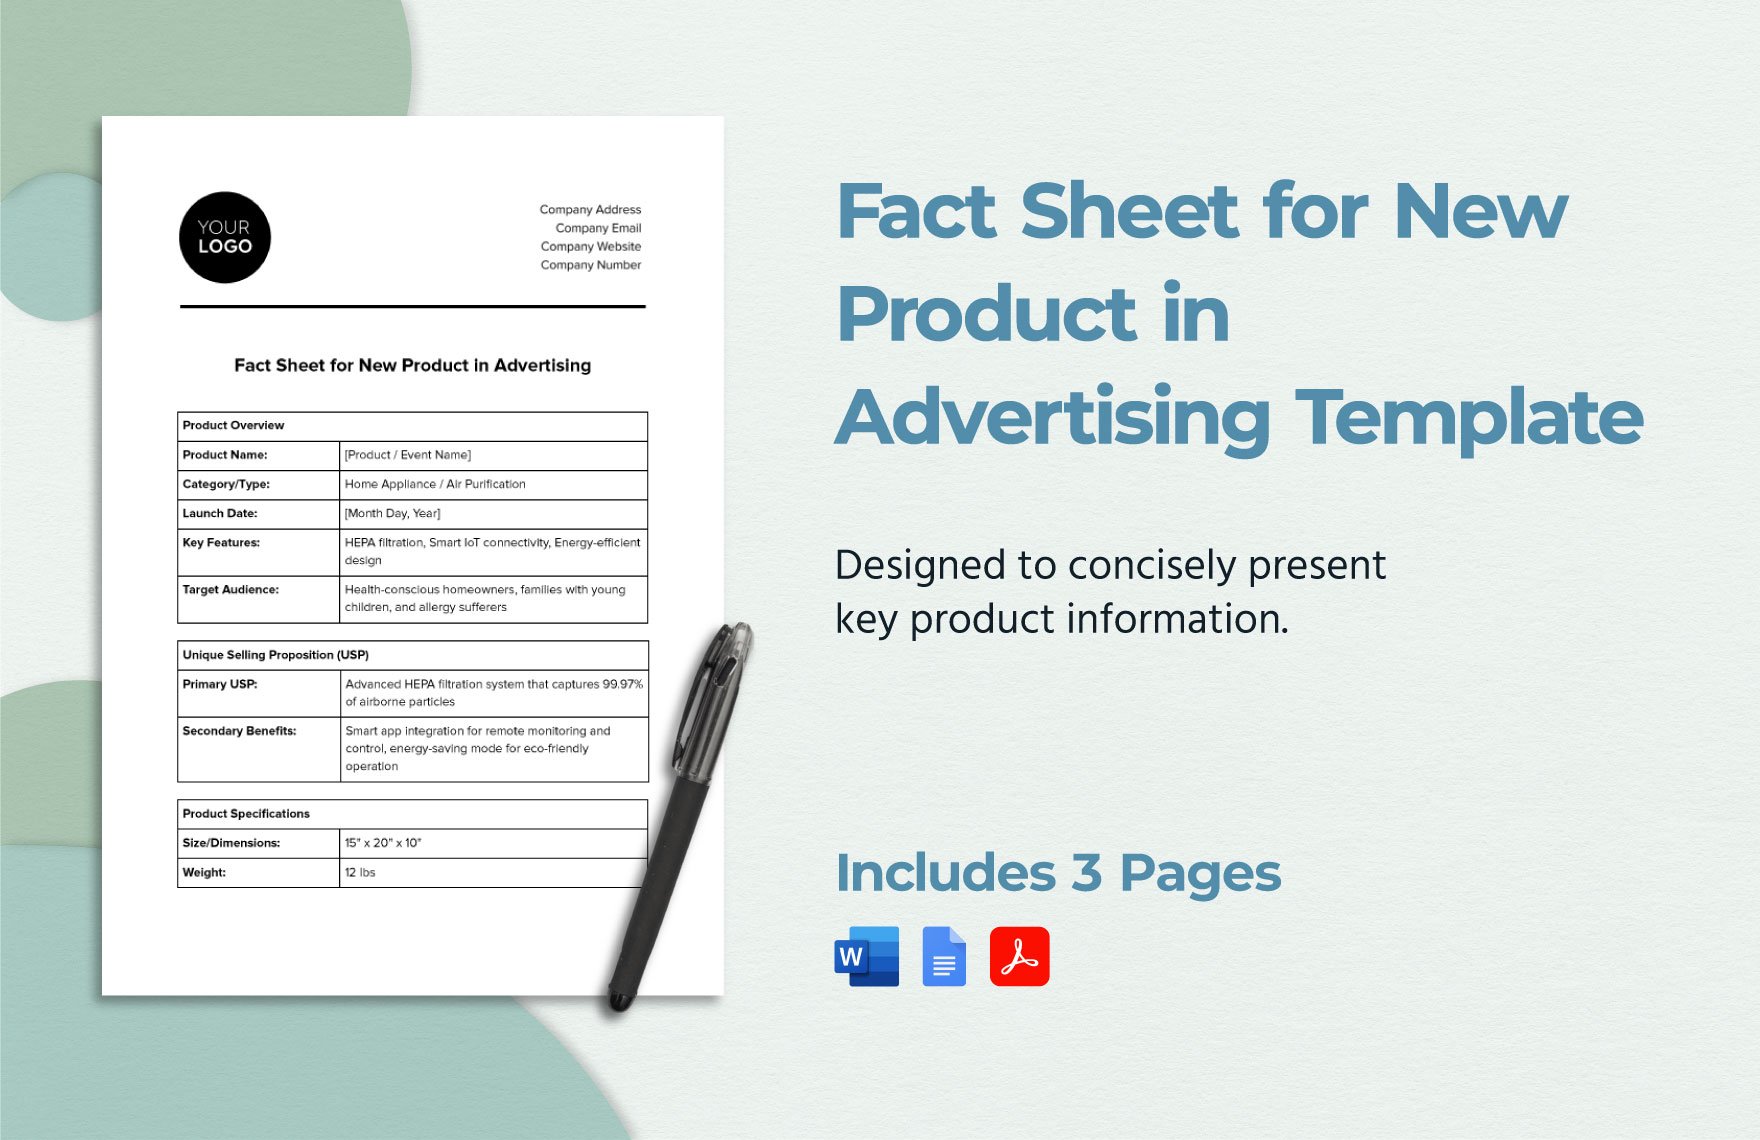 Fact Sheet for New Product in Advertising Template